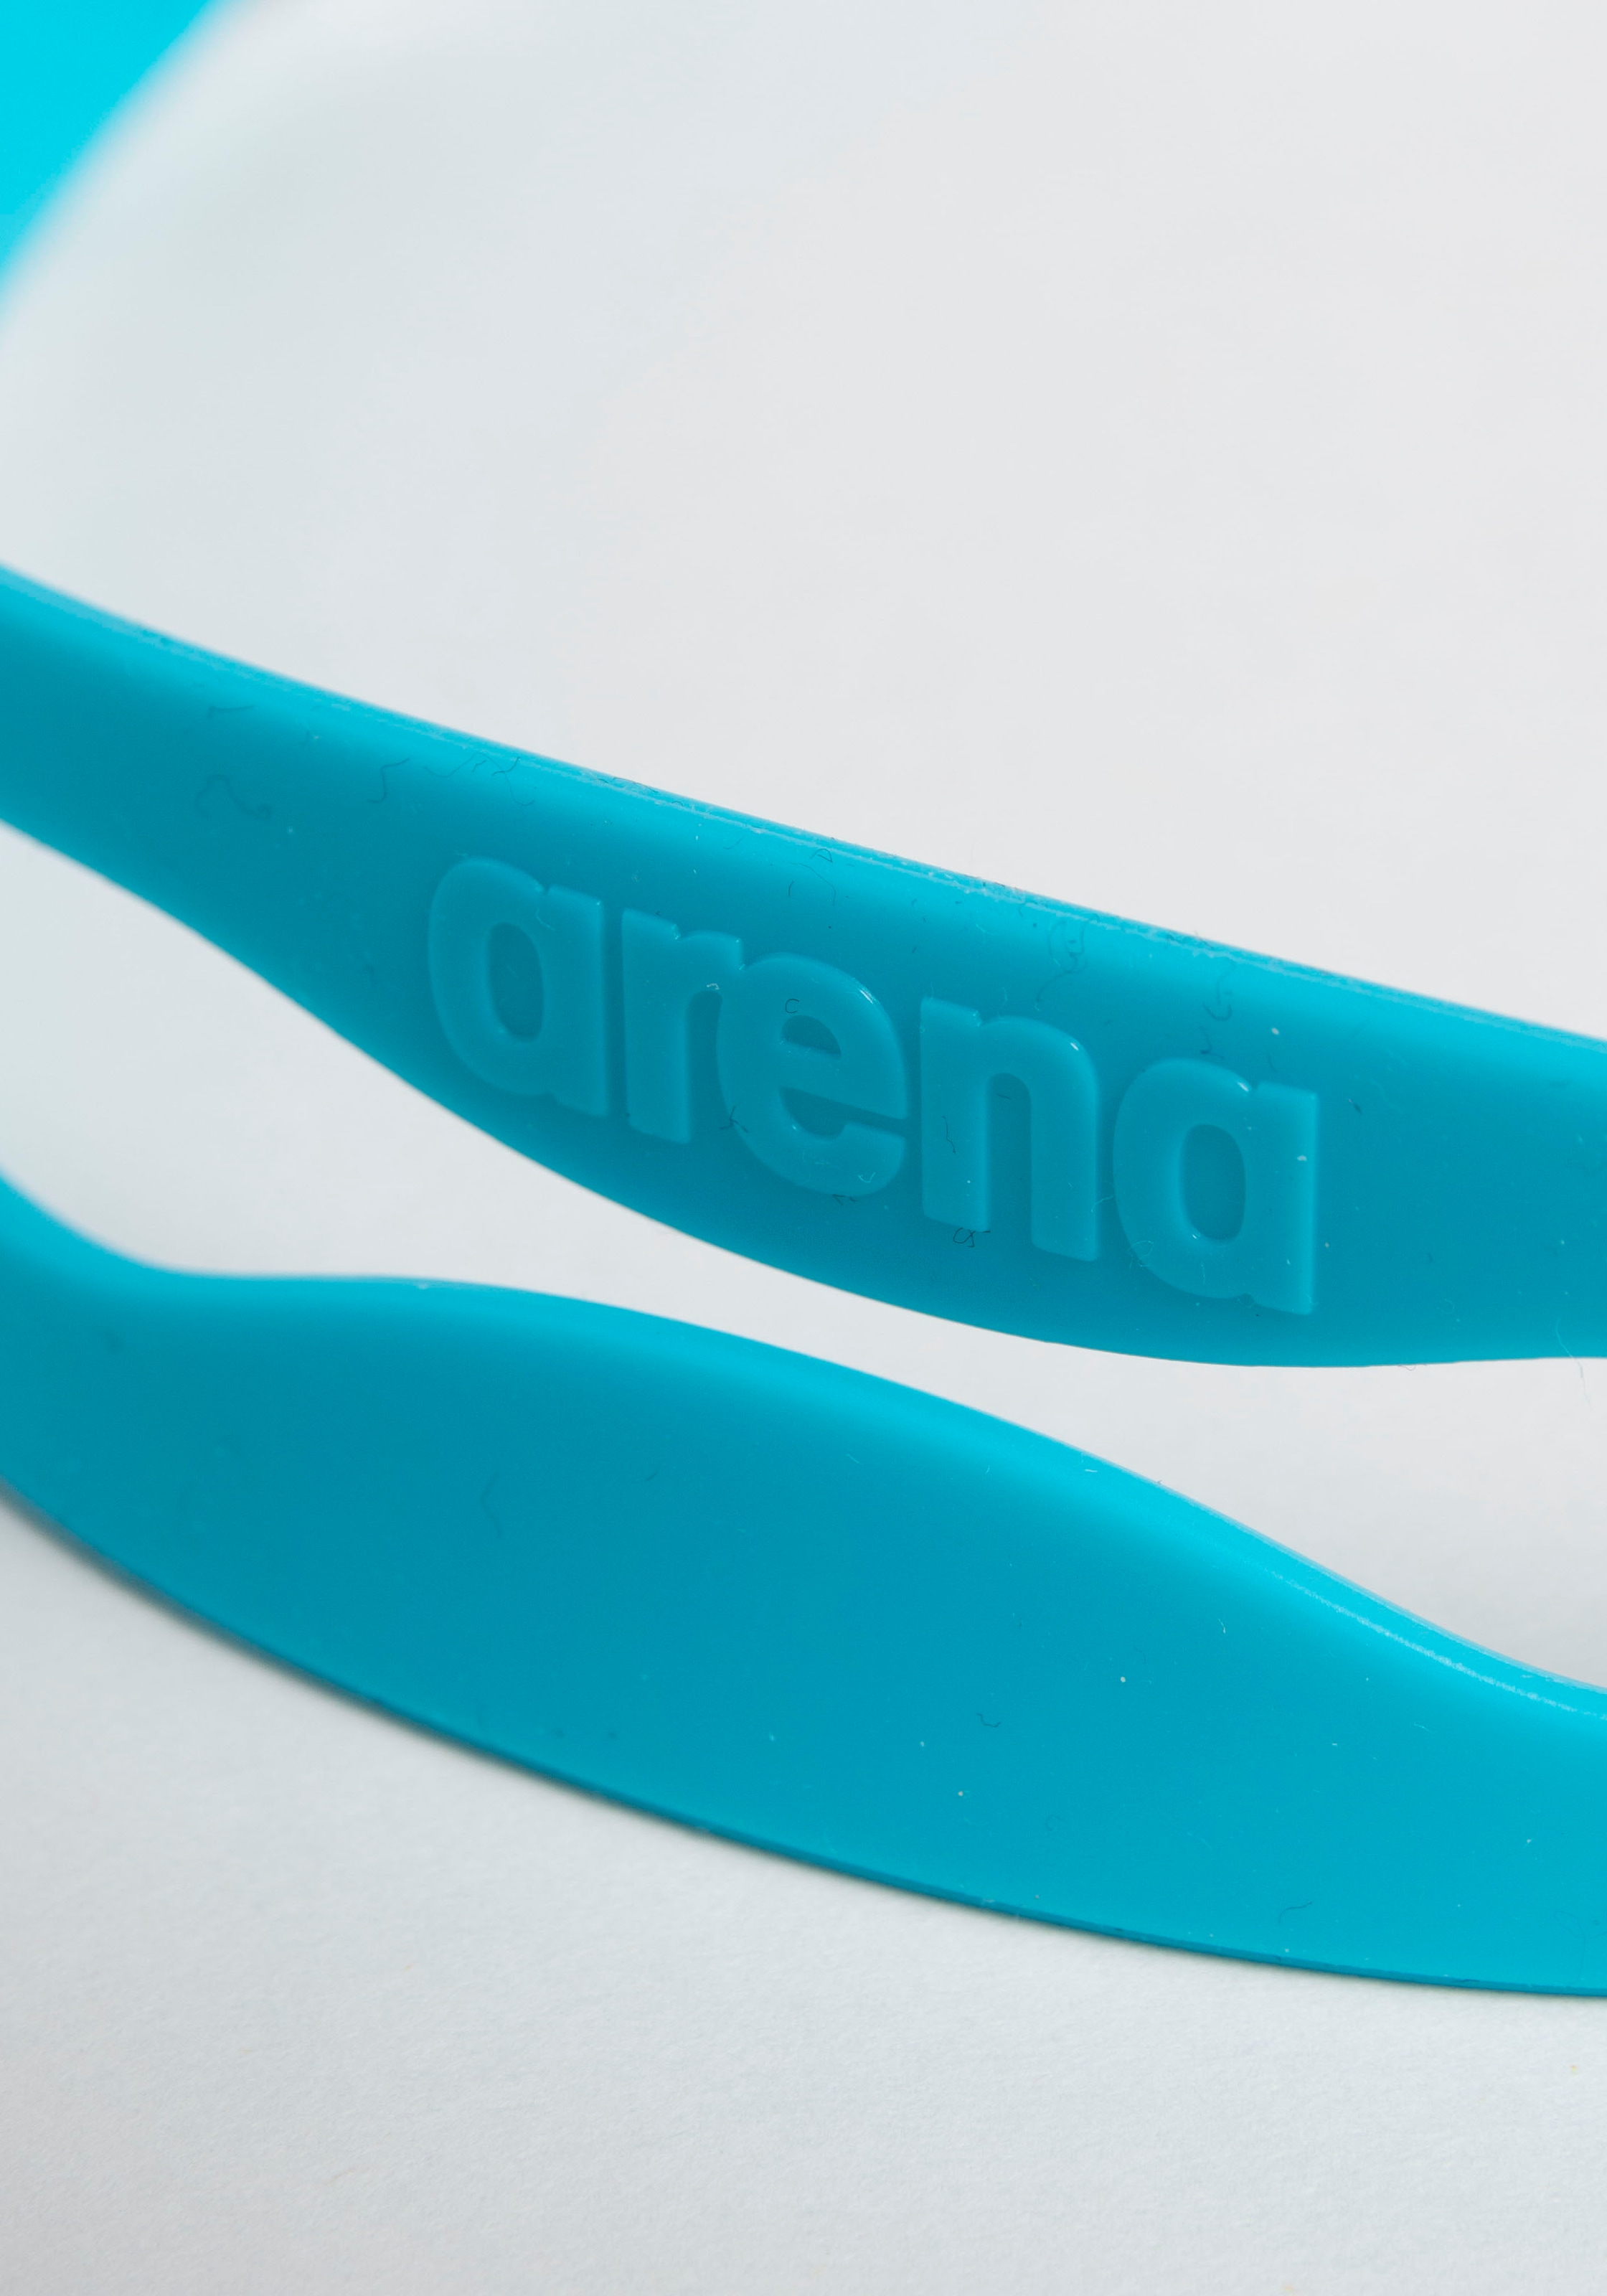 Arena Schwimmbrille »THE ONE MASK JR«